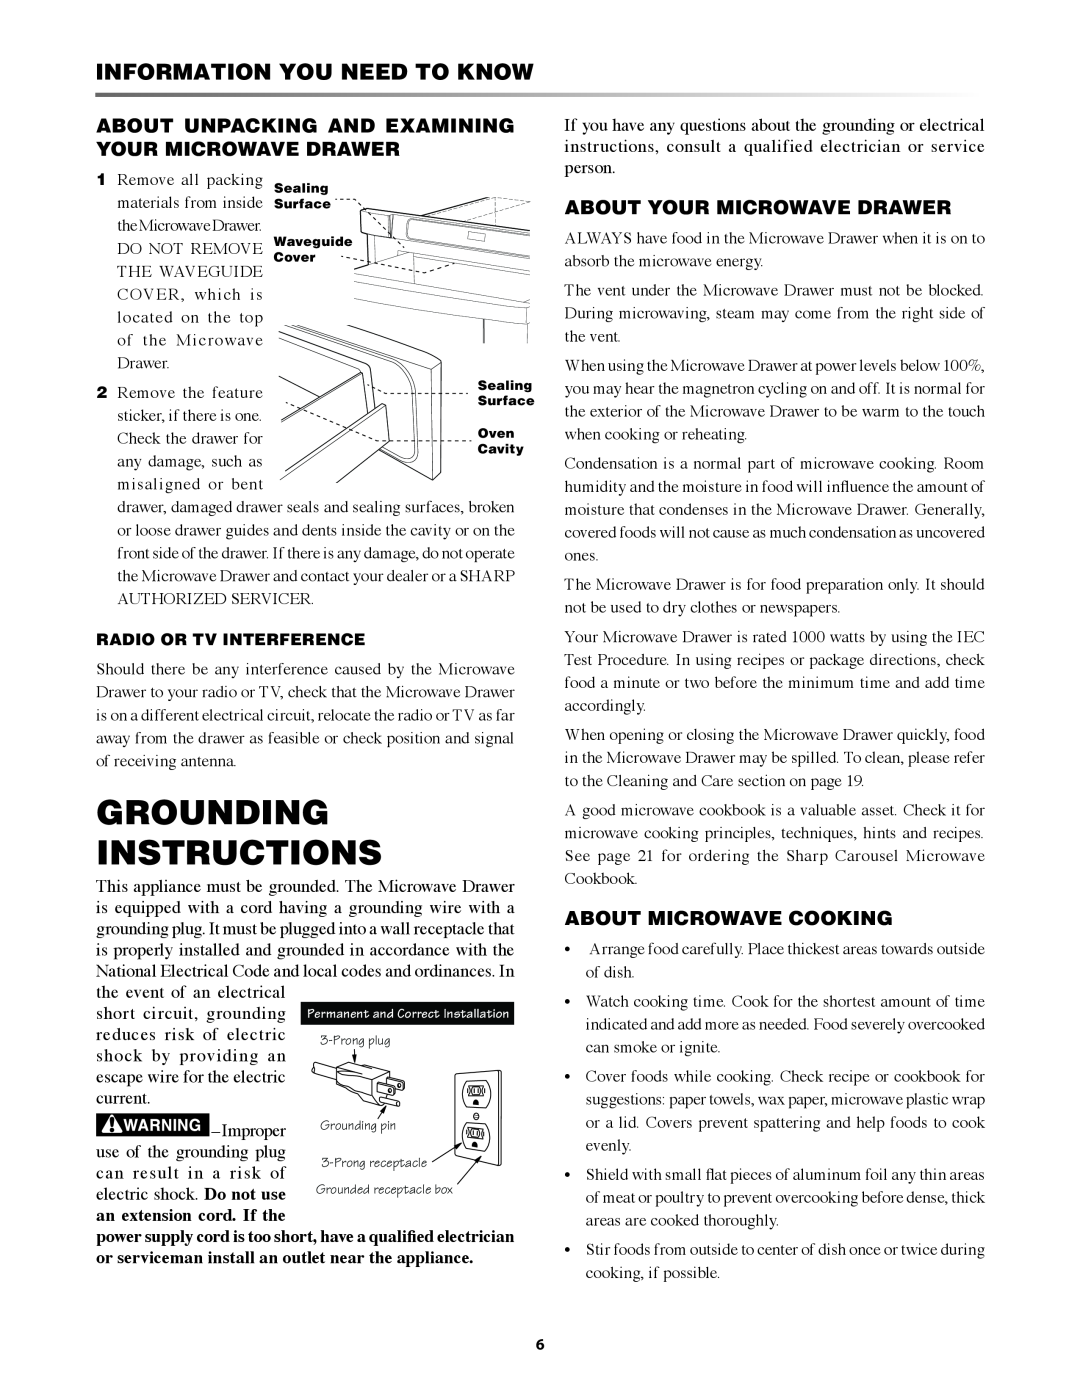 Sharp KB6524PK Grounding Instructions, Information You Need To know, About Unpacking and Examining Your Microwave Drawer 